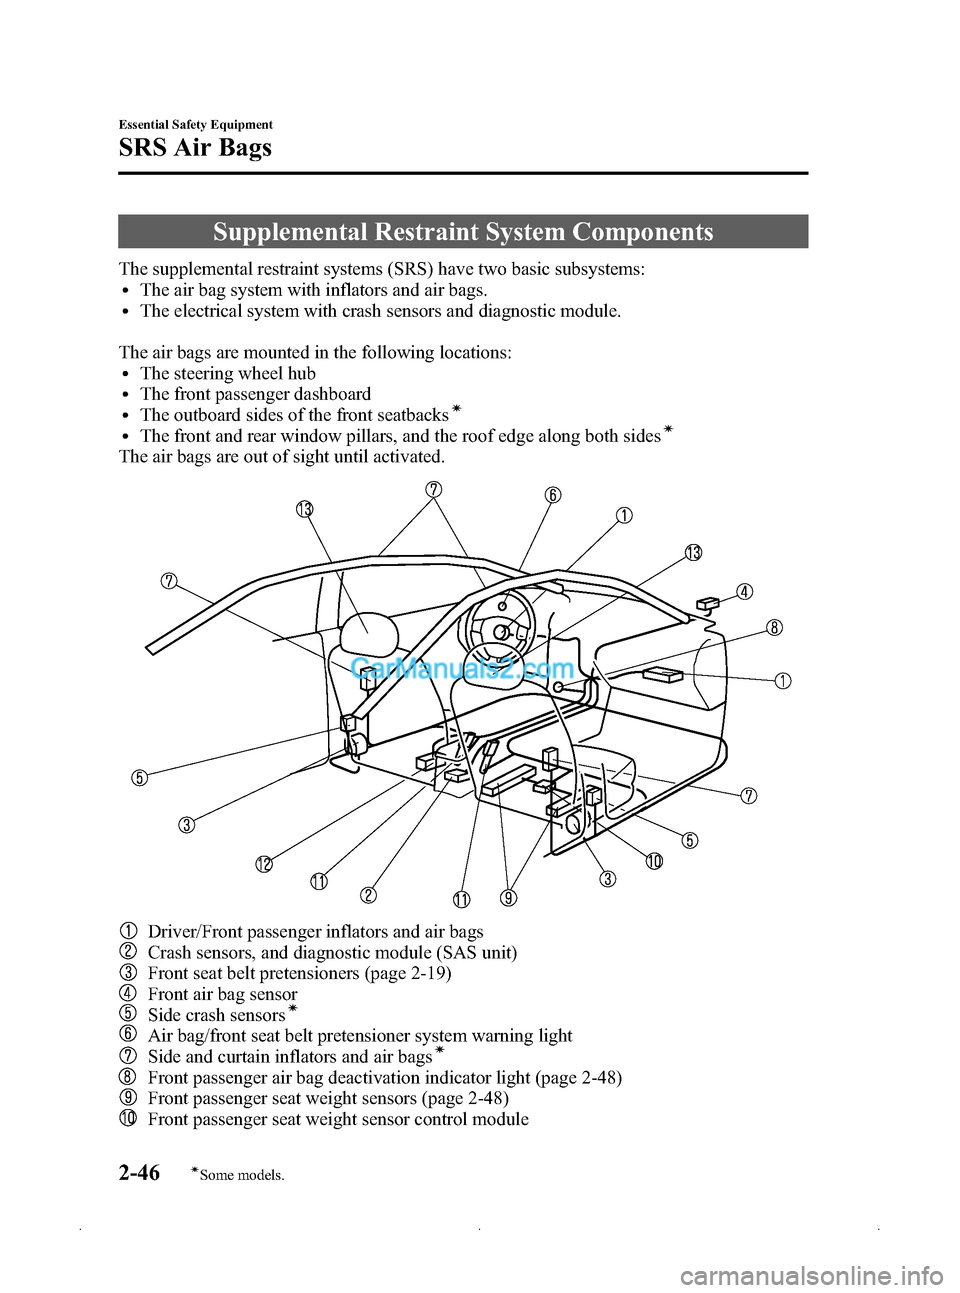 MAZDA MODEL MAZDASPEED 3 2009  Owners Manual (in English) Black plate (60,1)
Supplemental Restraint System Components
The supplemental restraint systems (SRS) have two basic subsystems:lThe air bag system with inflators and air bags.lThe electrical system wi